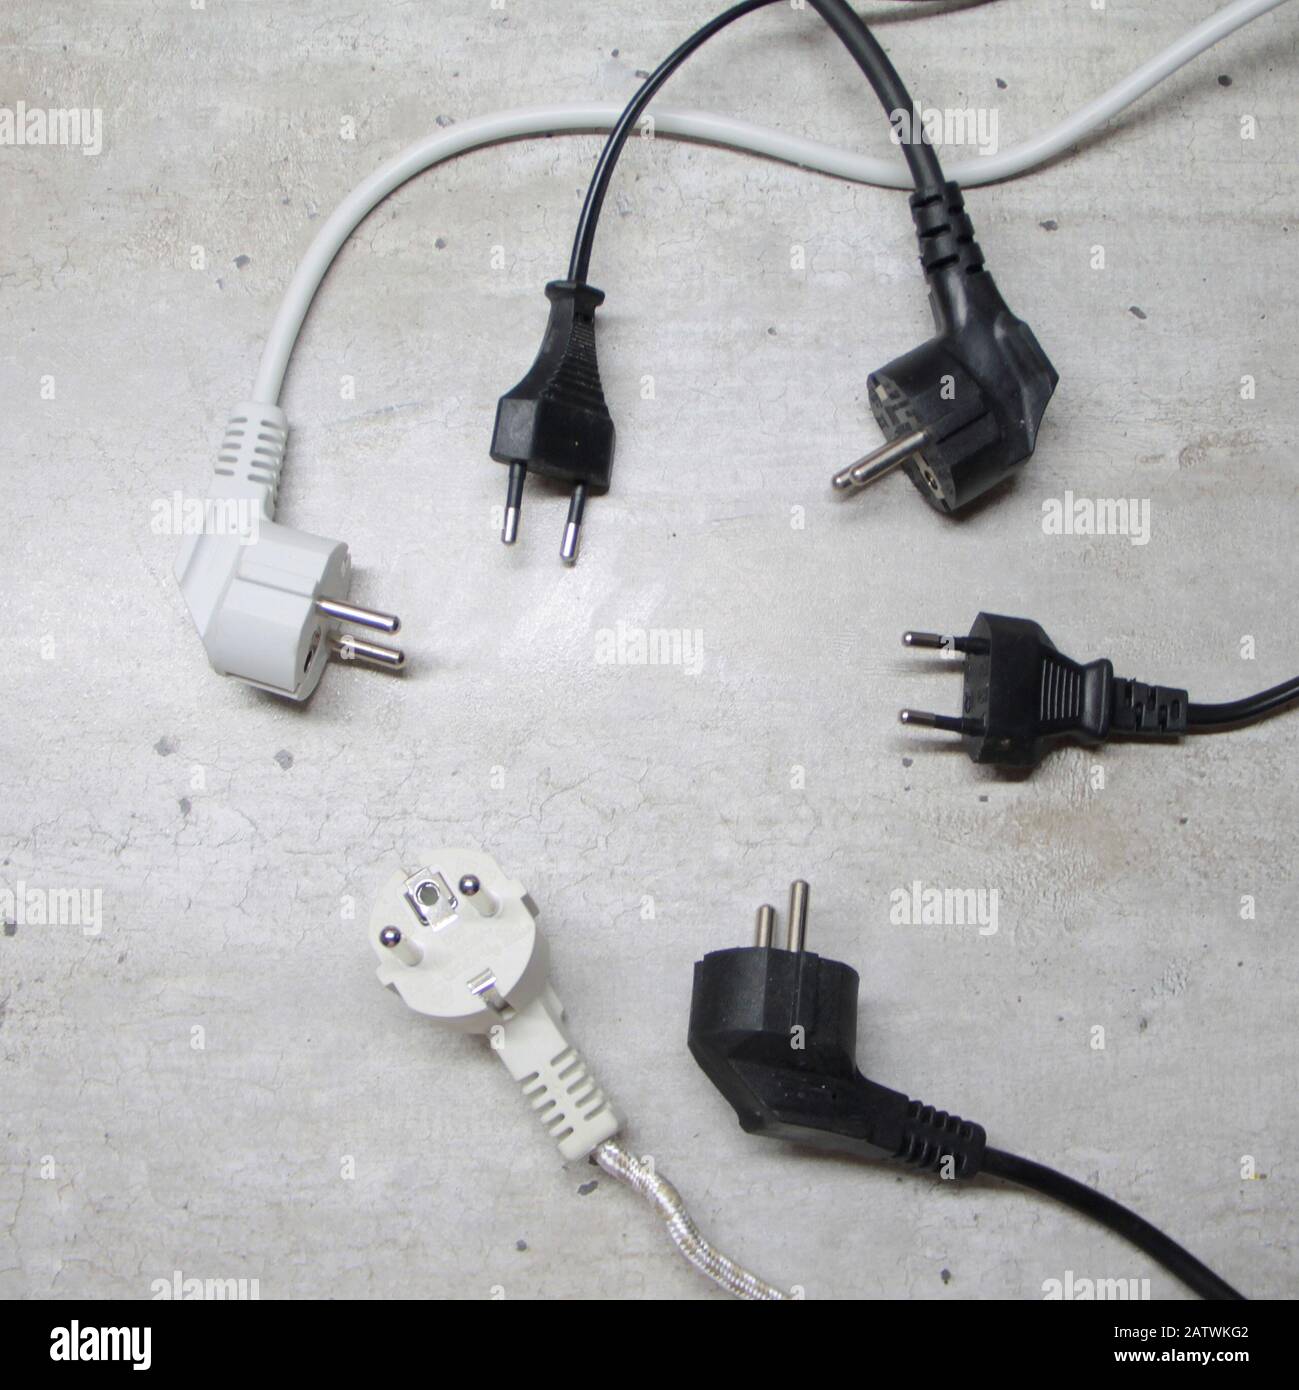 Electric plugs with cords lie on a gray surface in a circle. Stock Photo